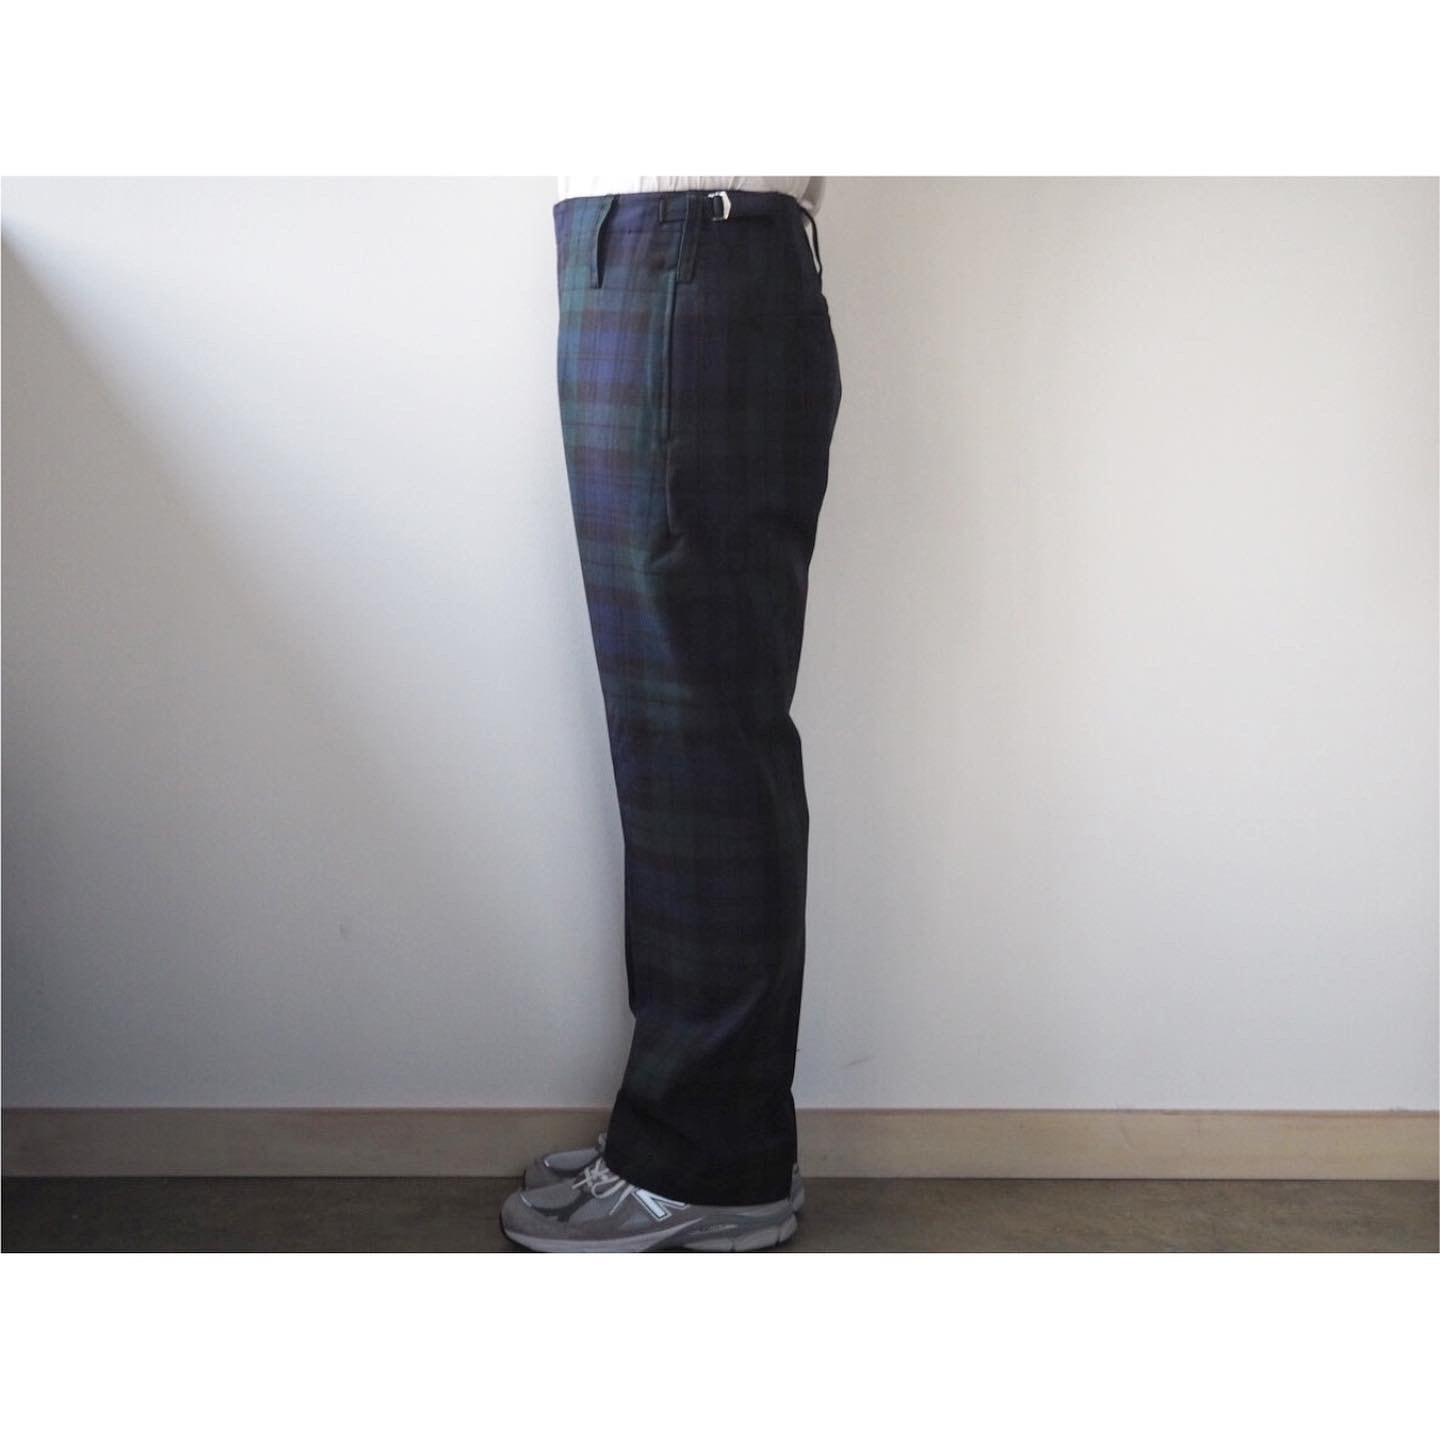 Kinloch Anderson(キンロック アンダーソン) Regimental Pants | AUTHENTIC Life Store  powered by BASE